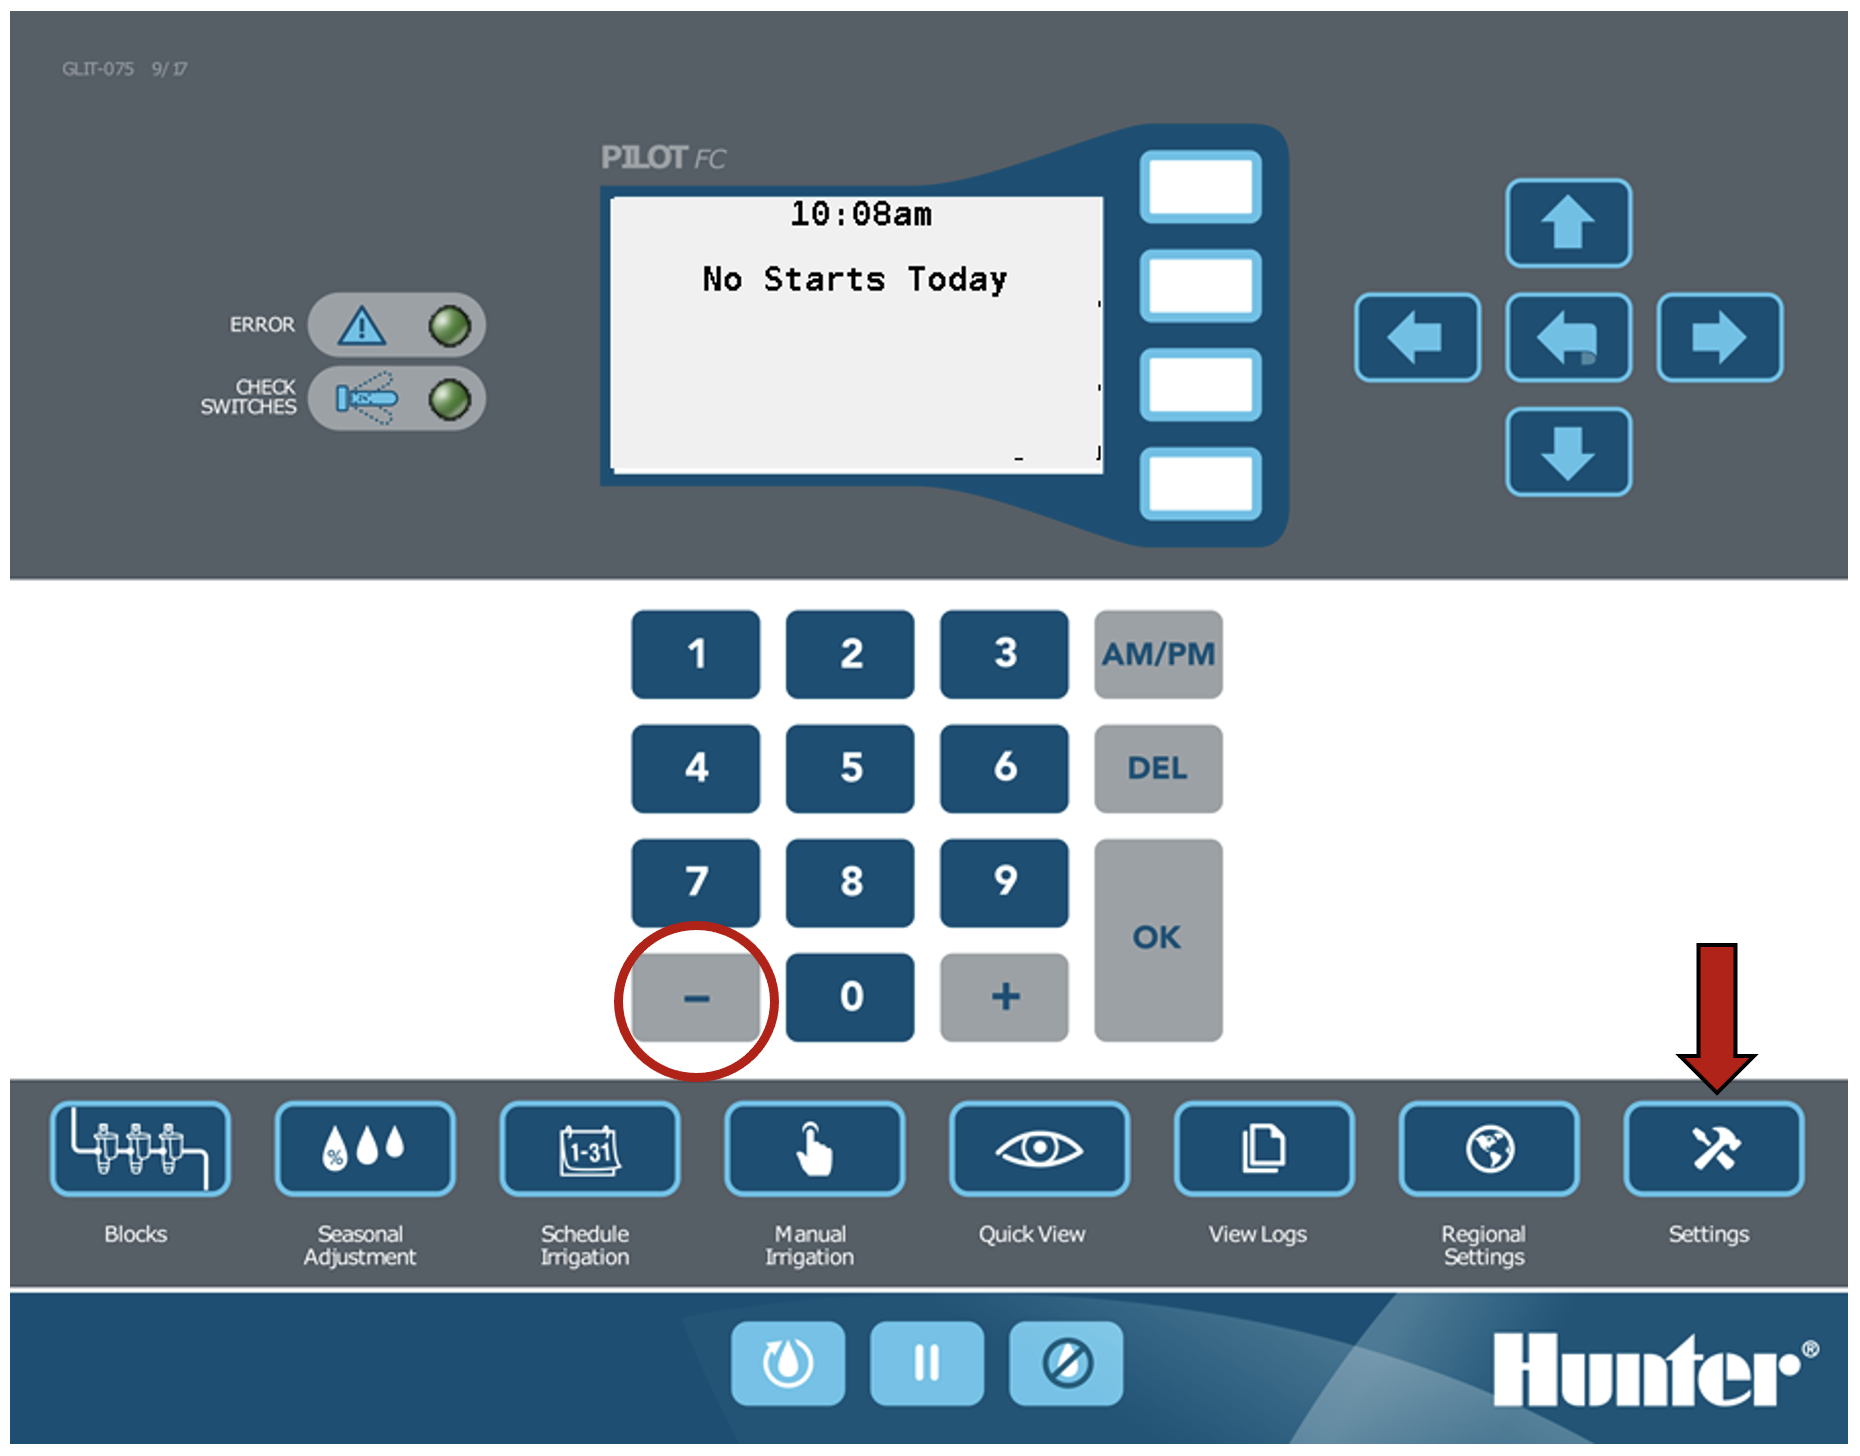 Image of the facepack highlighting the Settings button and the minus button.